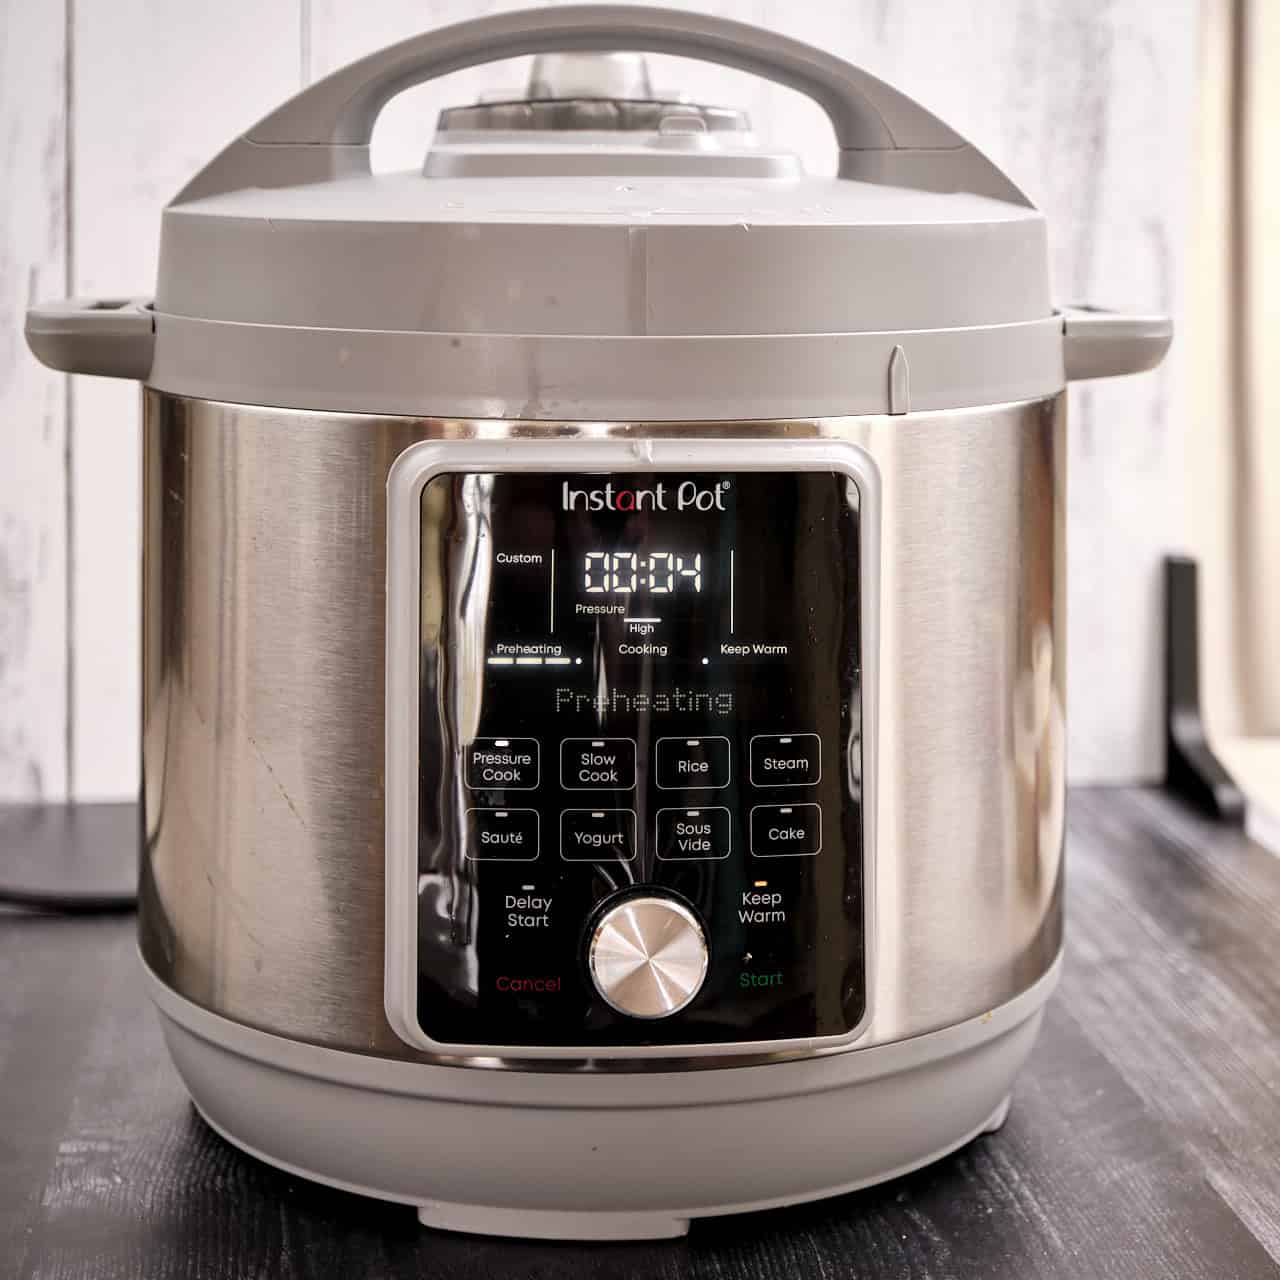 Instant Pot set to pressure cook for 4 minutes